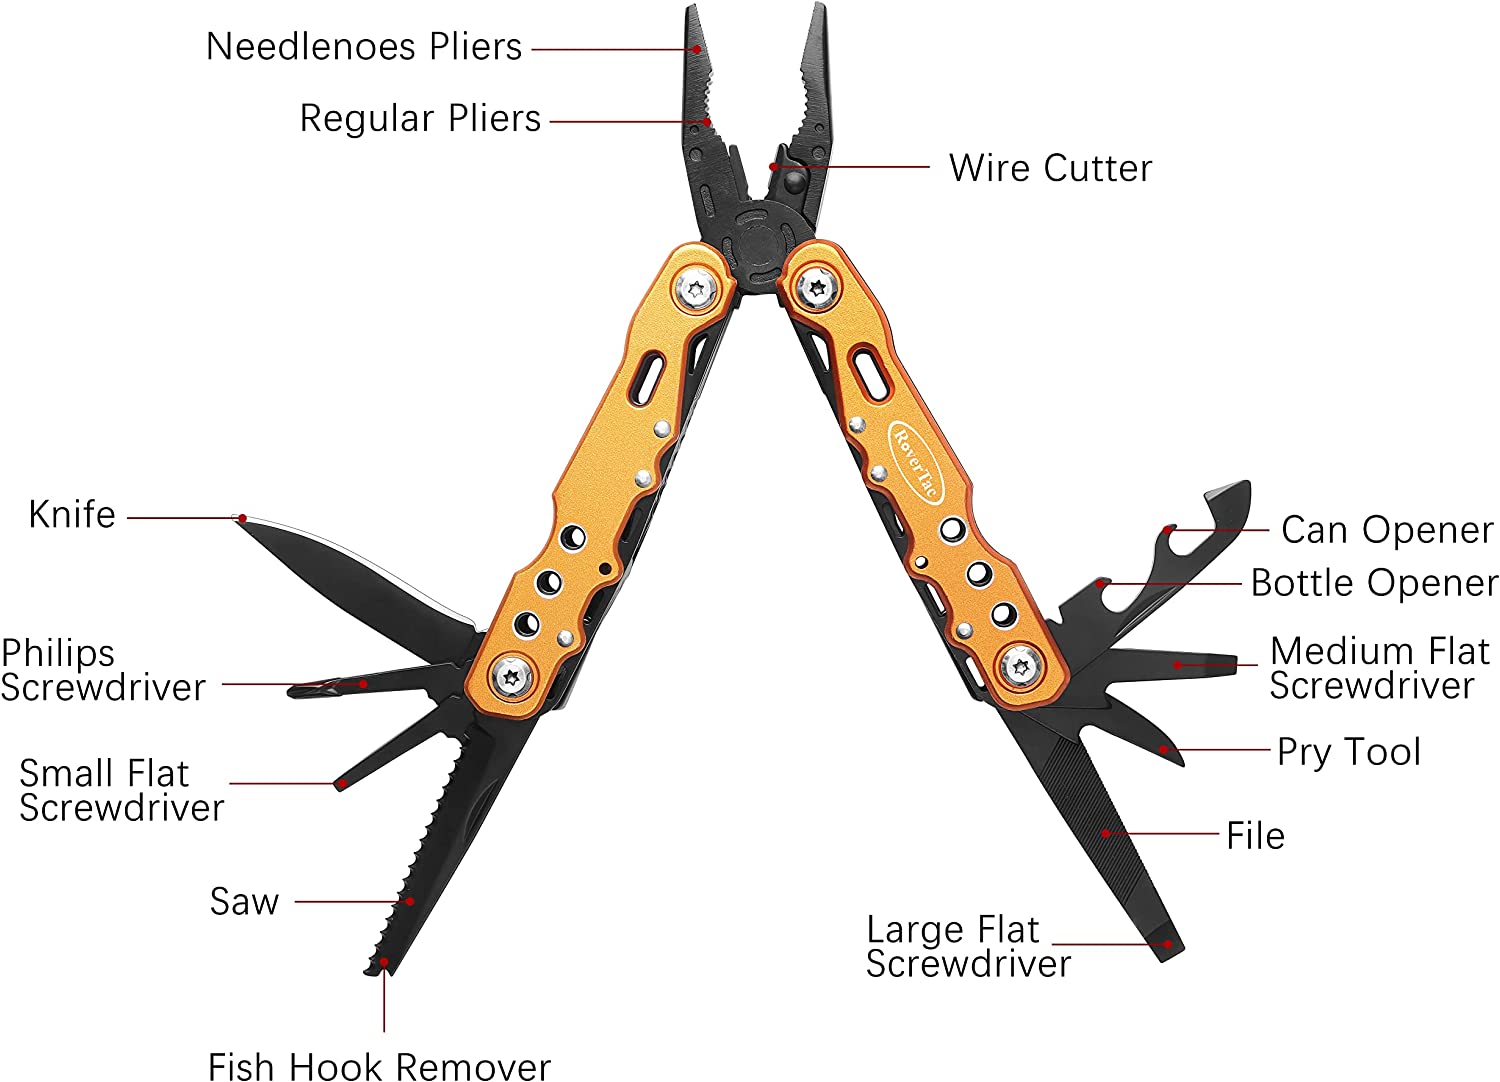 14-in-1 Multitool Pliers-Gold,Screwdrivers Saw Bottle Opener Perfect for Camping Survival Hiking Repairs